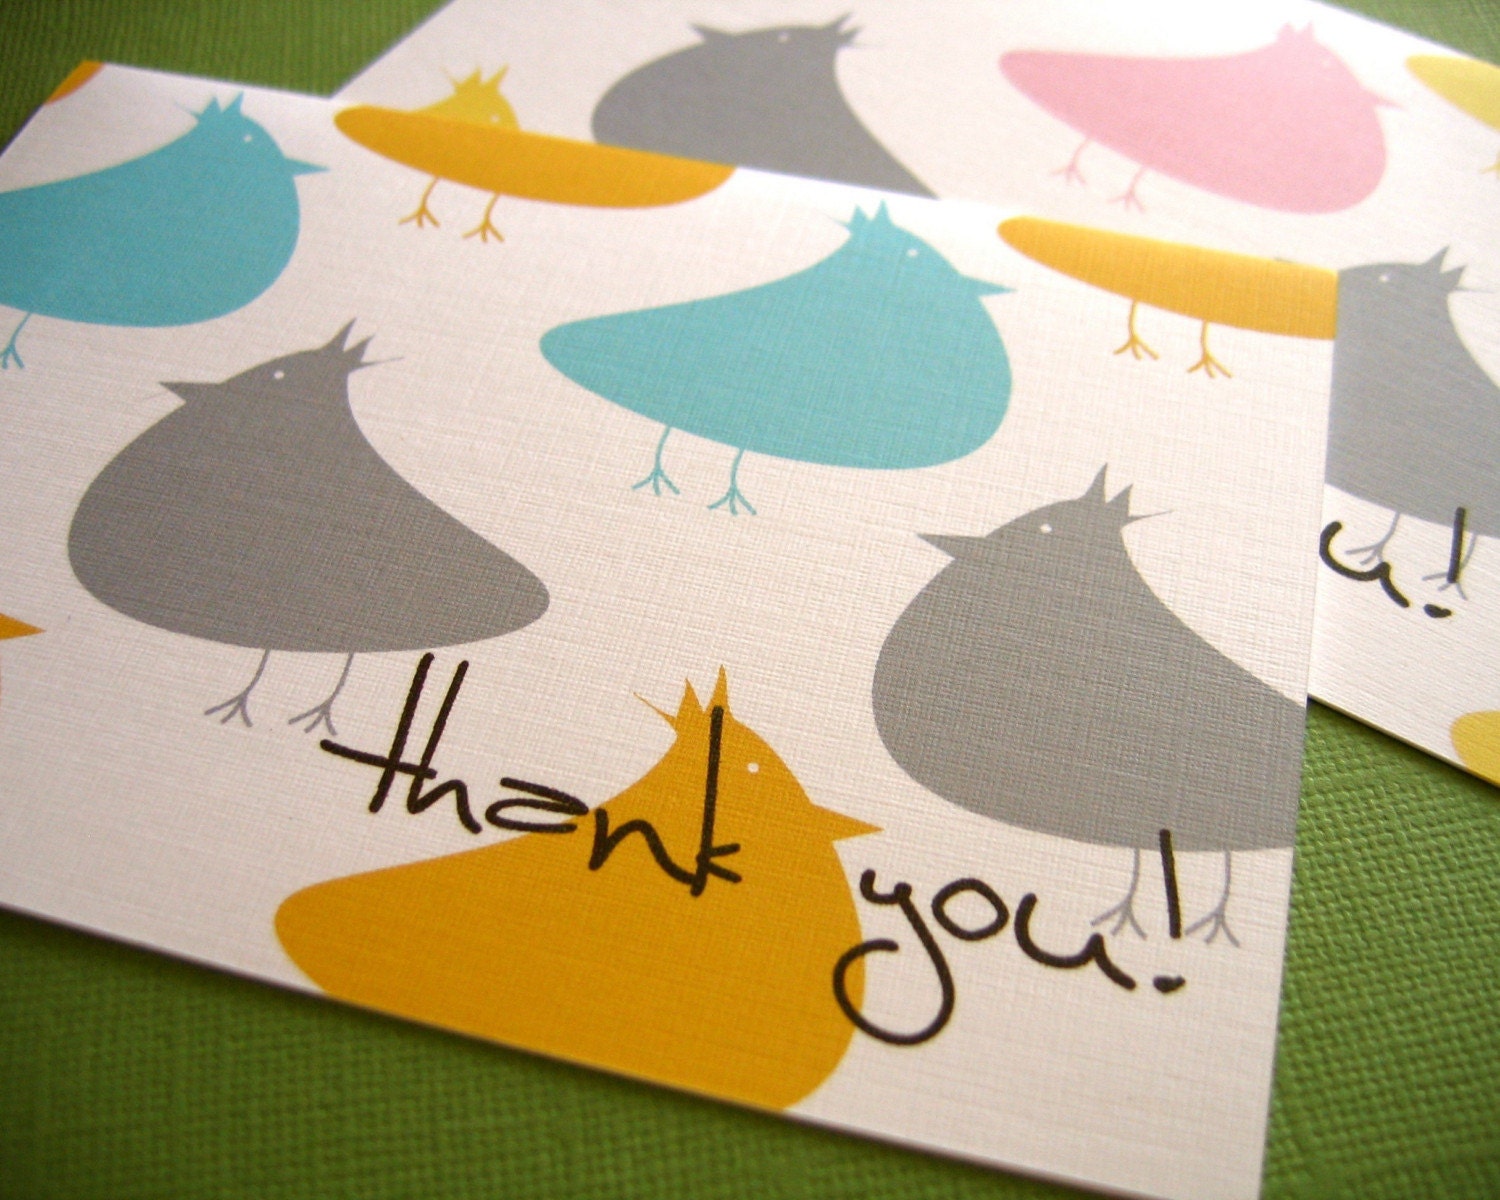 So Nice of You- Thank You cards set of 6